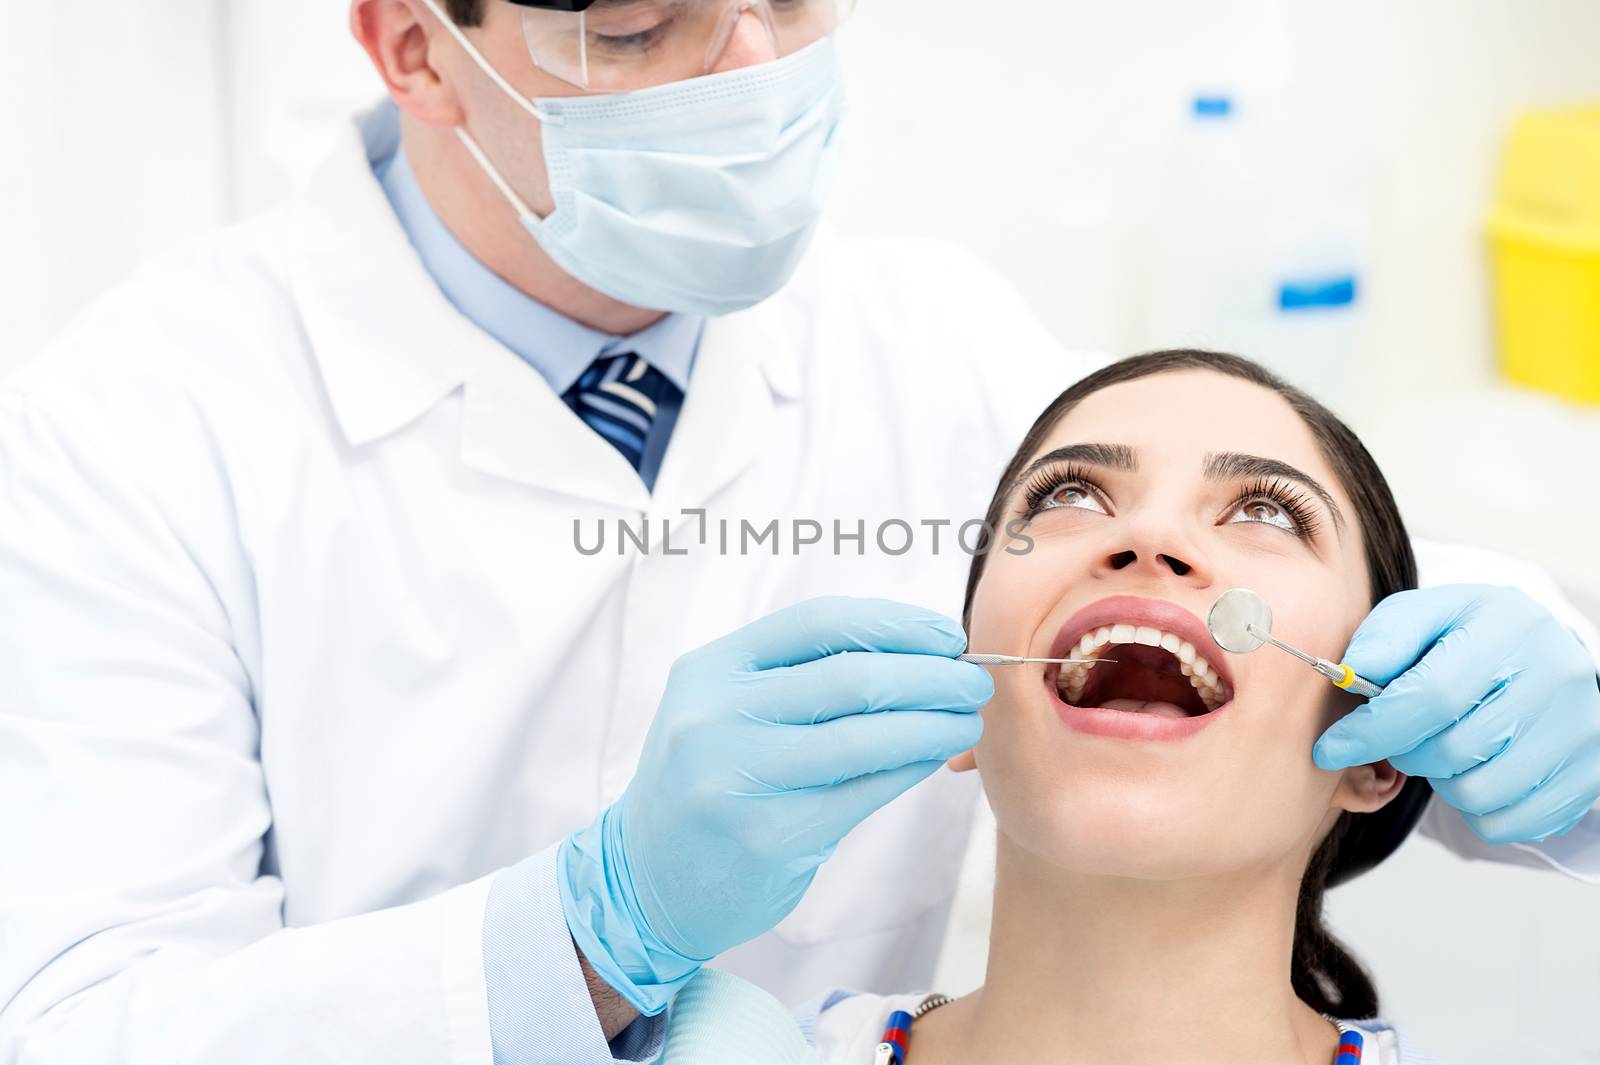 Teeth checkup at dentist clinic by stockyimages